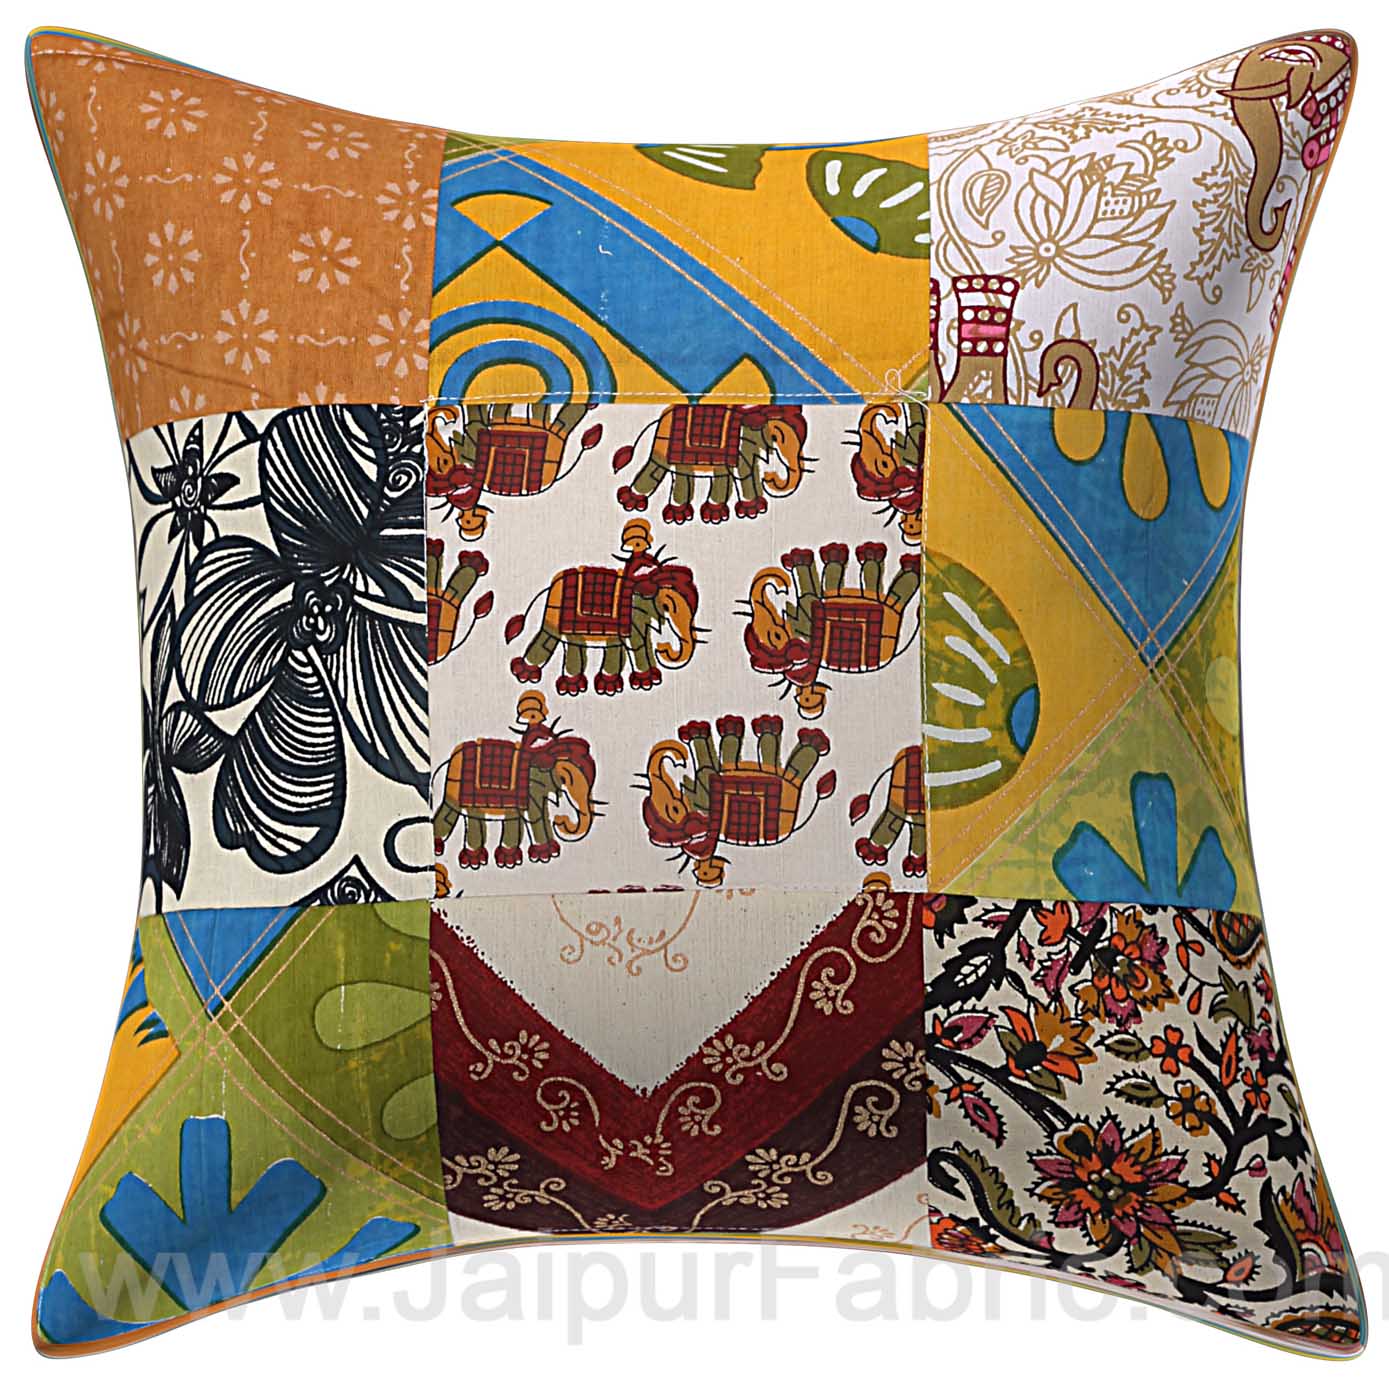 Colorful Patchwork Royal Cushion Cover